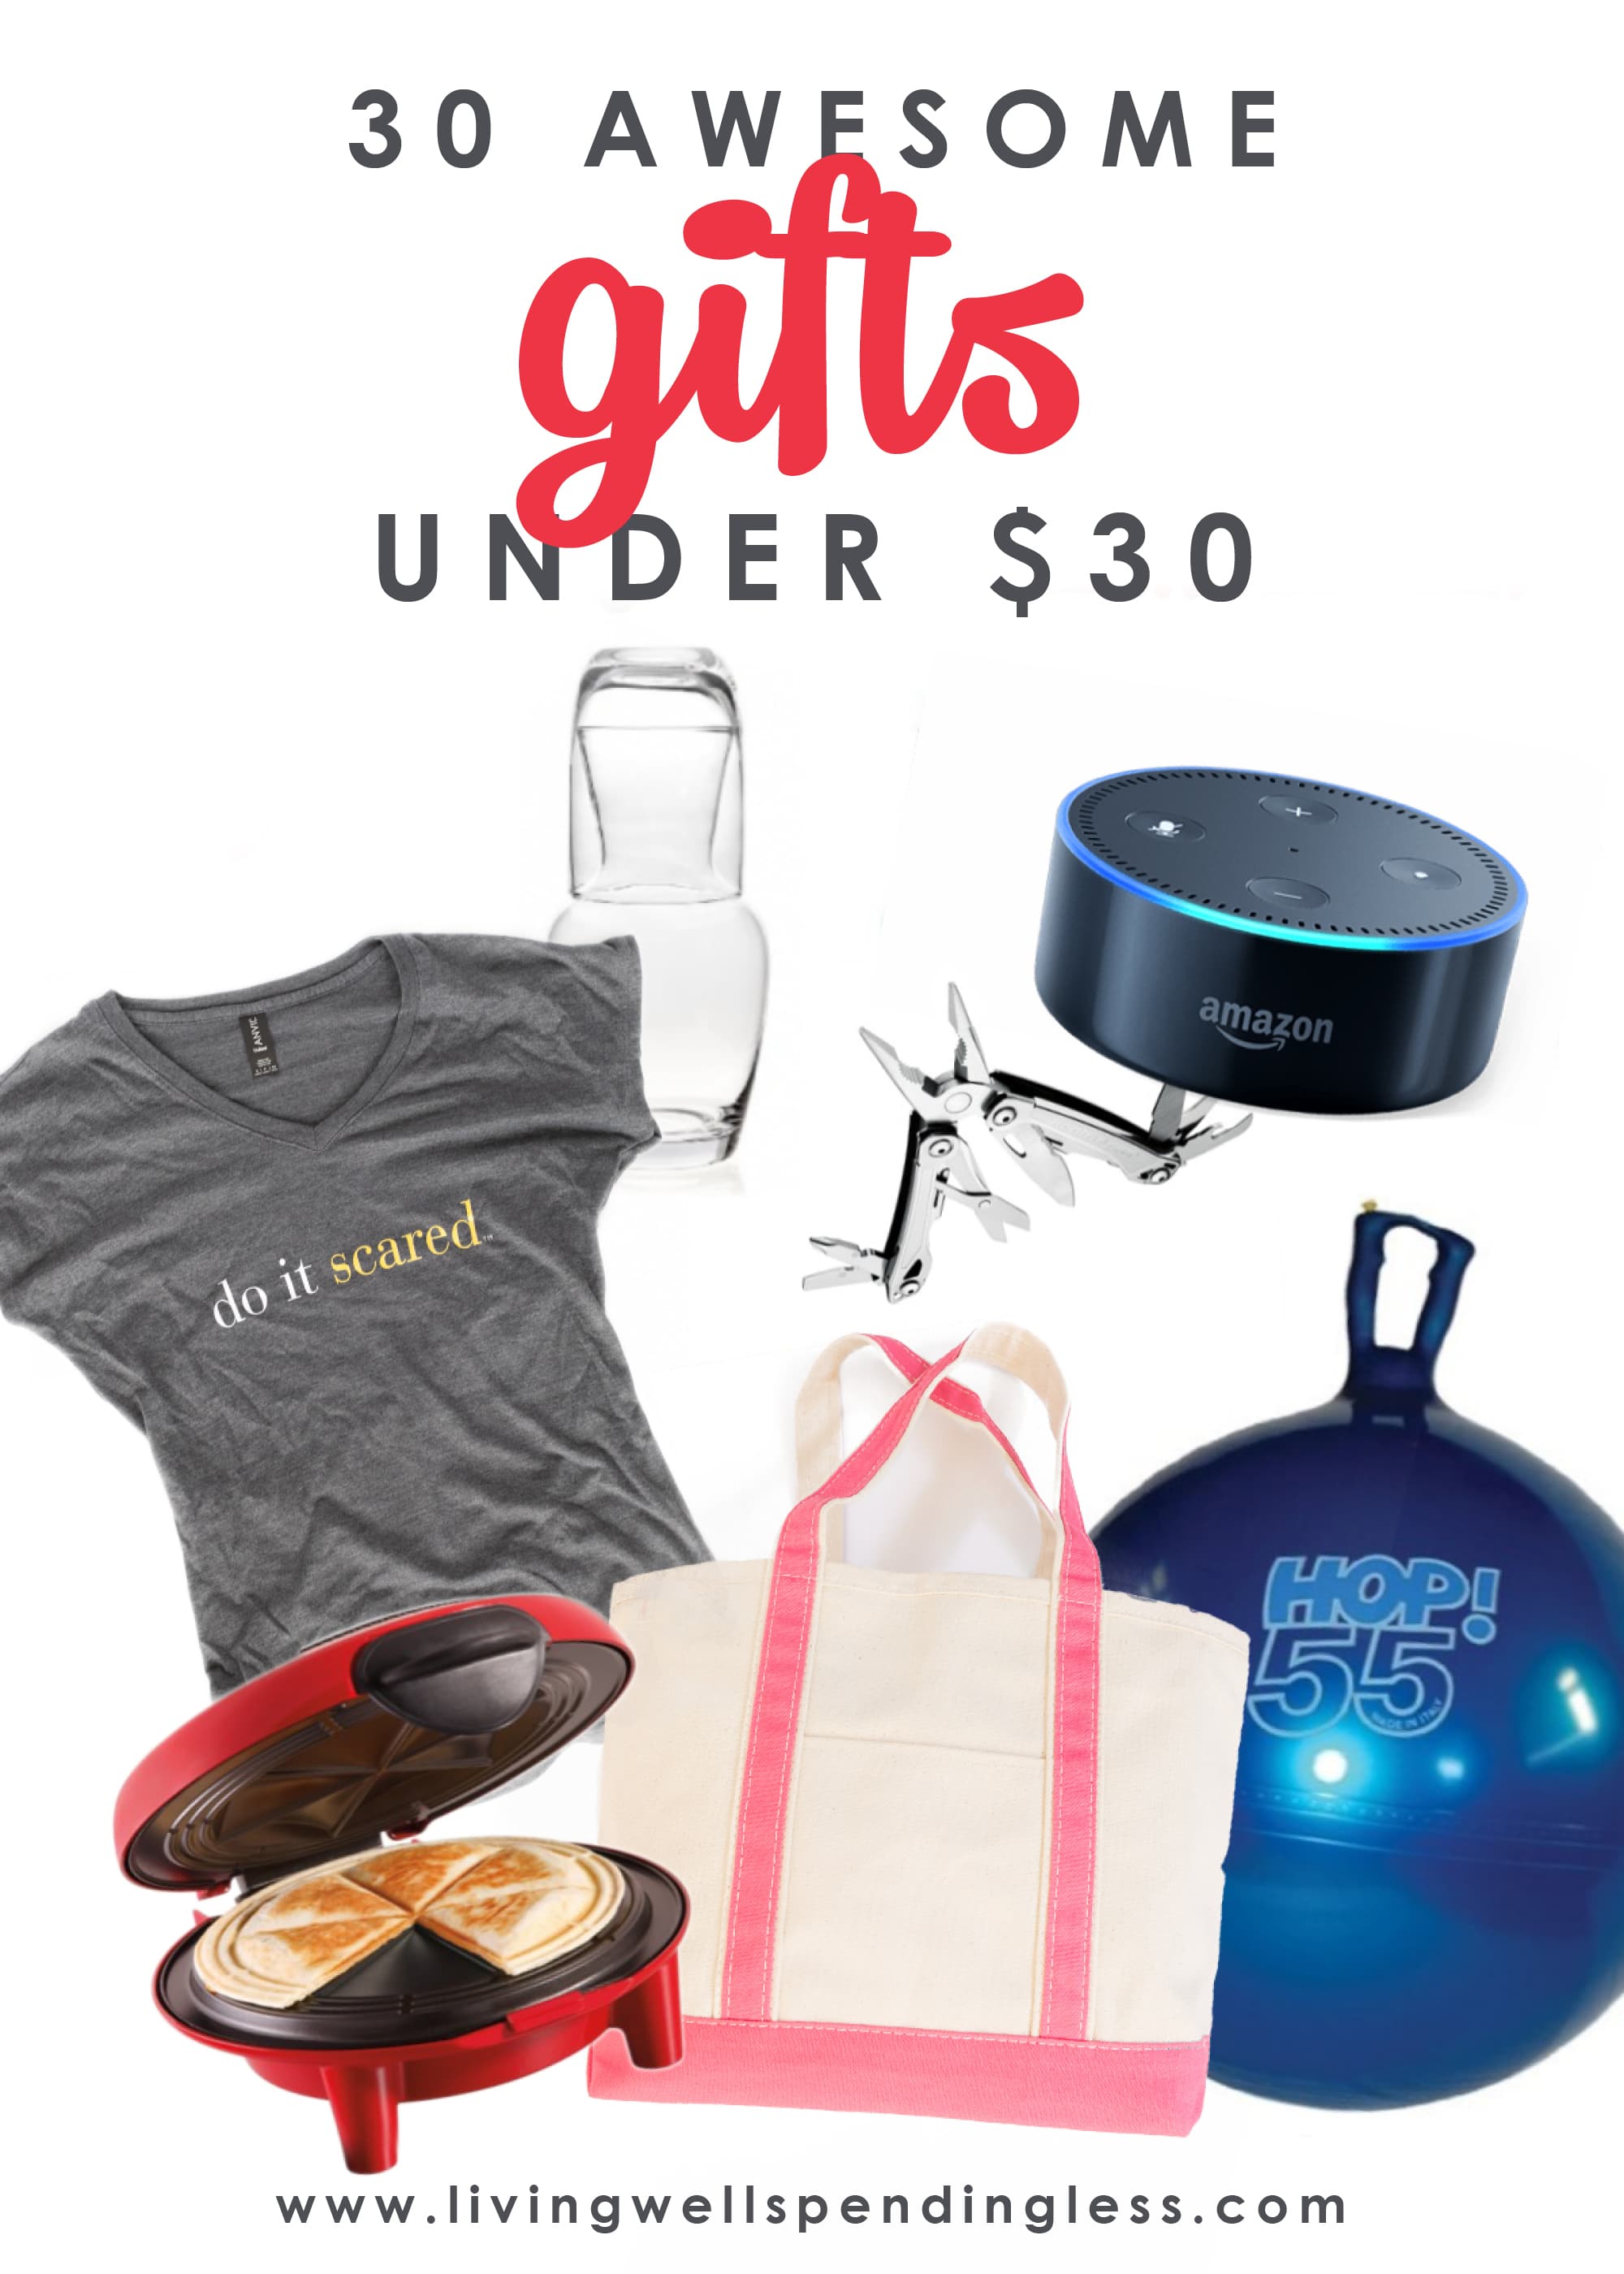 Finding the perfect gift can be a challenge, especially when you don't have much to spend! If you've still got some shopping to do (or haven't even started yet) you will not want to miss these 30 awesome gift ideas for $30 or less! From kids to adults, these creative, practical, and thoughtful gifts will dazzle even the most challenging person on your list!